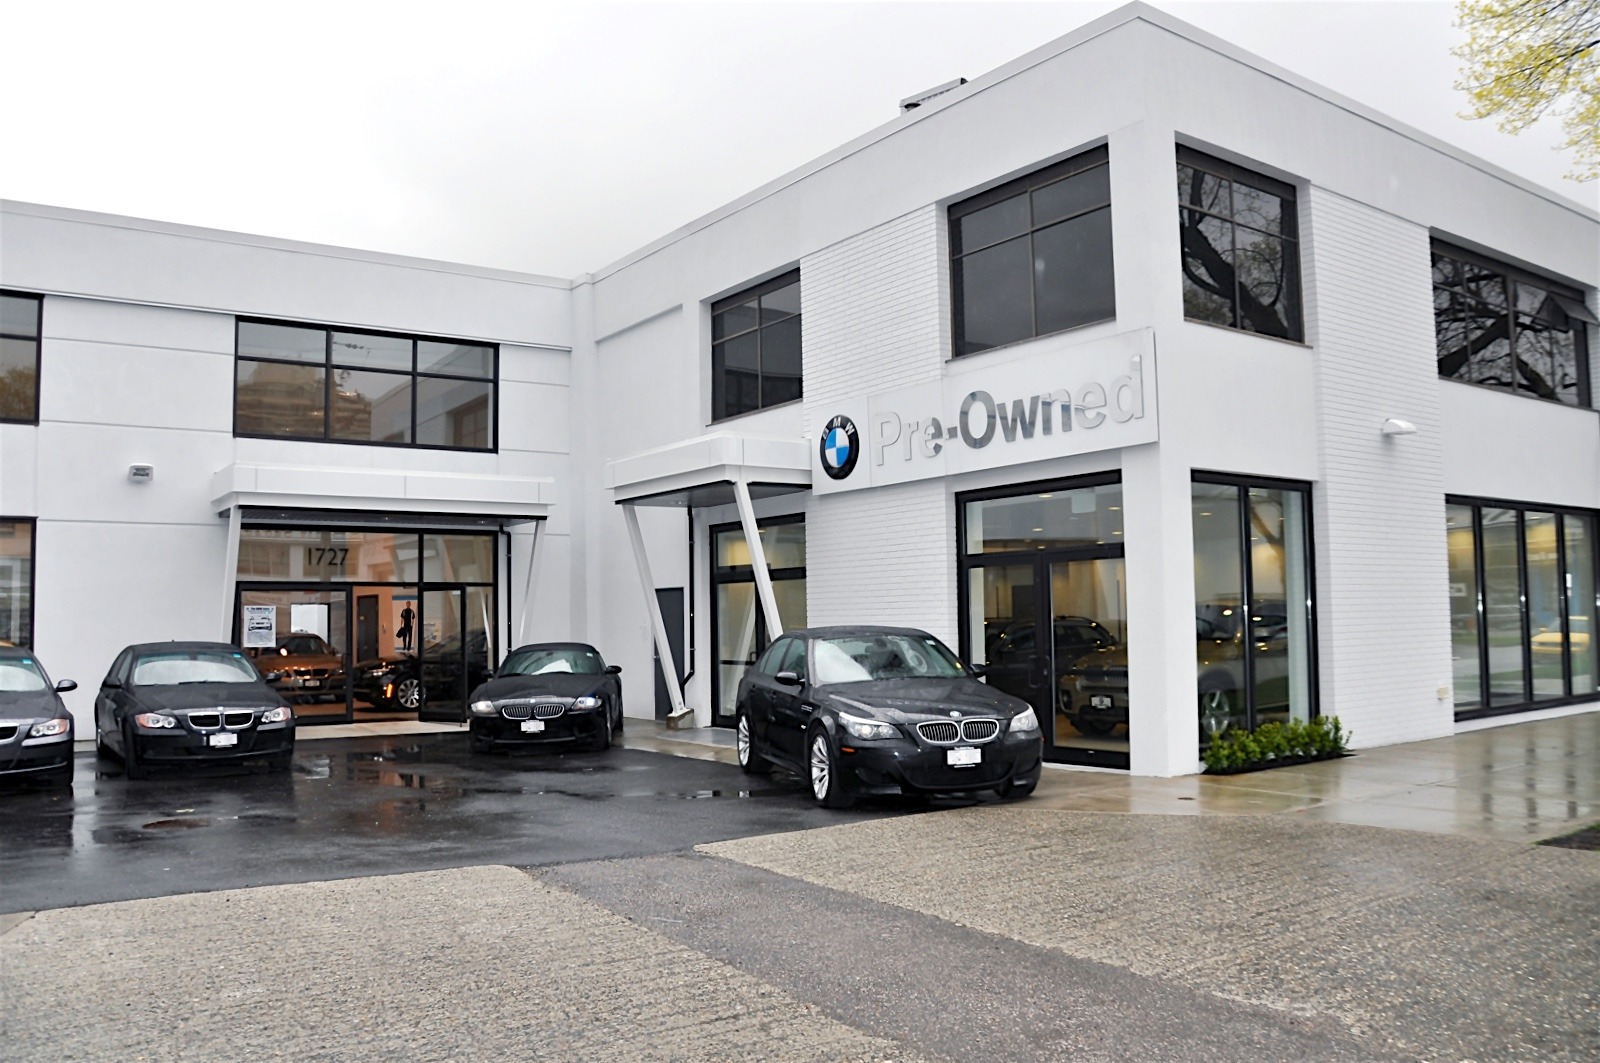 Robertson-Walls-Ceilings-Completed-Projects-Luxury-Car-Dealerships-The-BMW-Store-2 Completed Projects